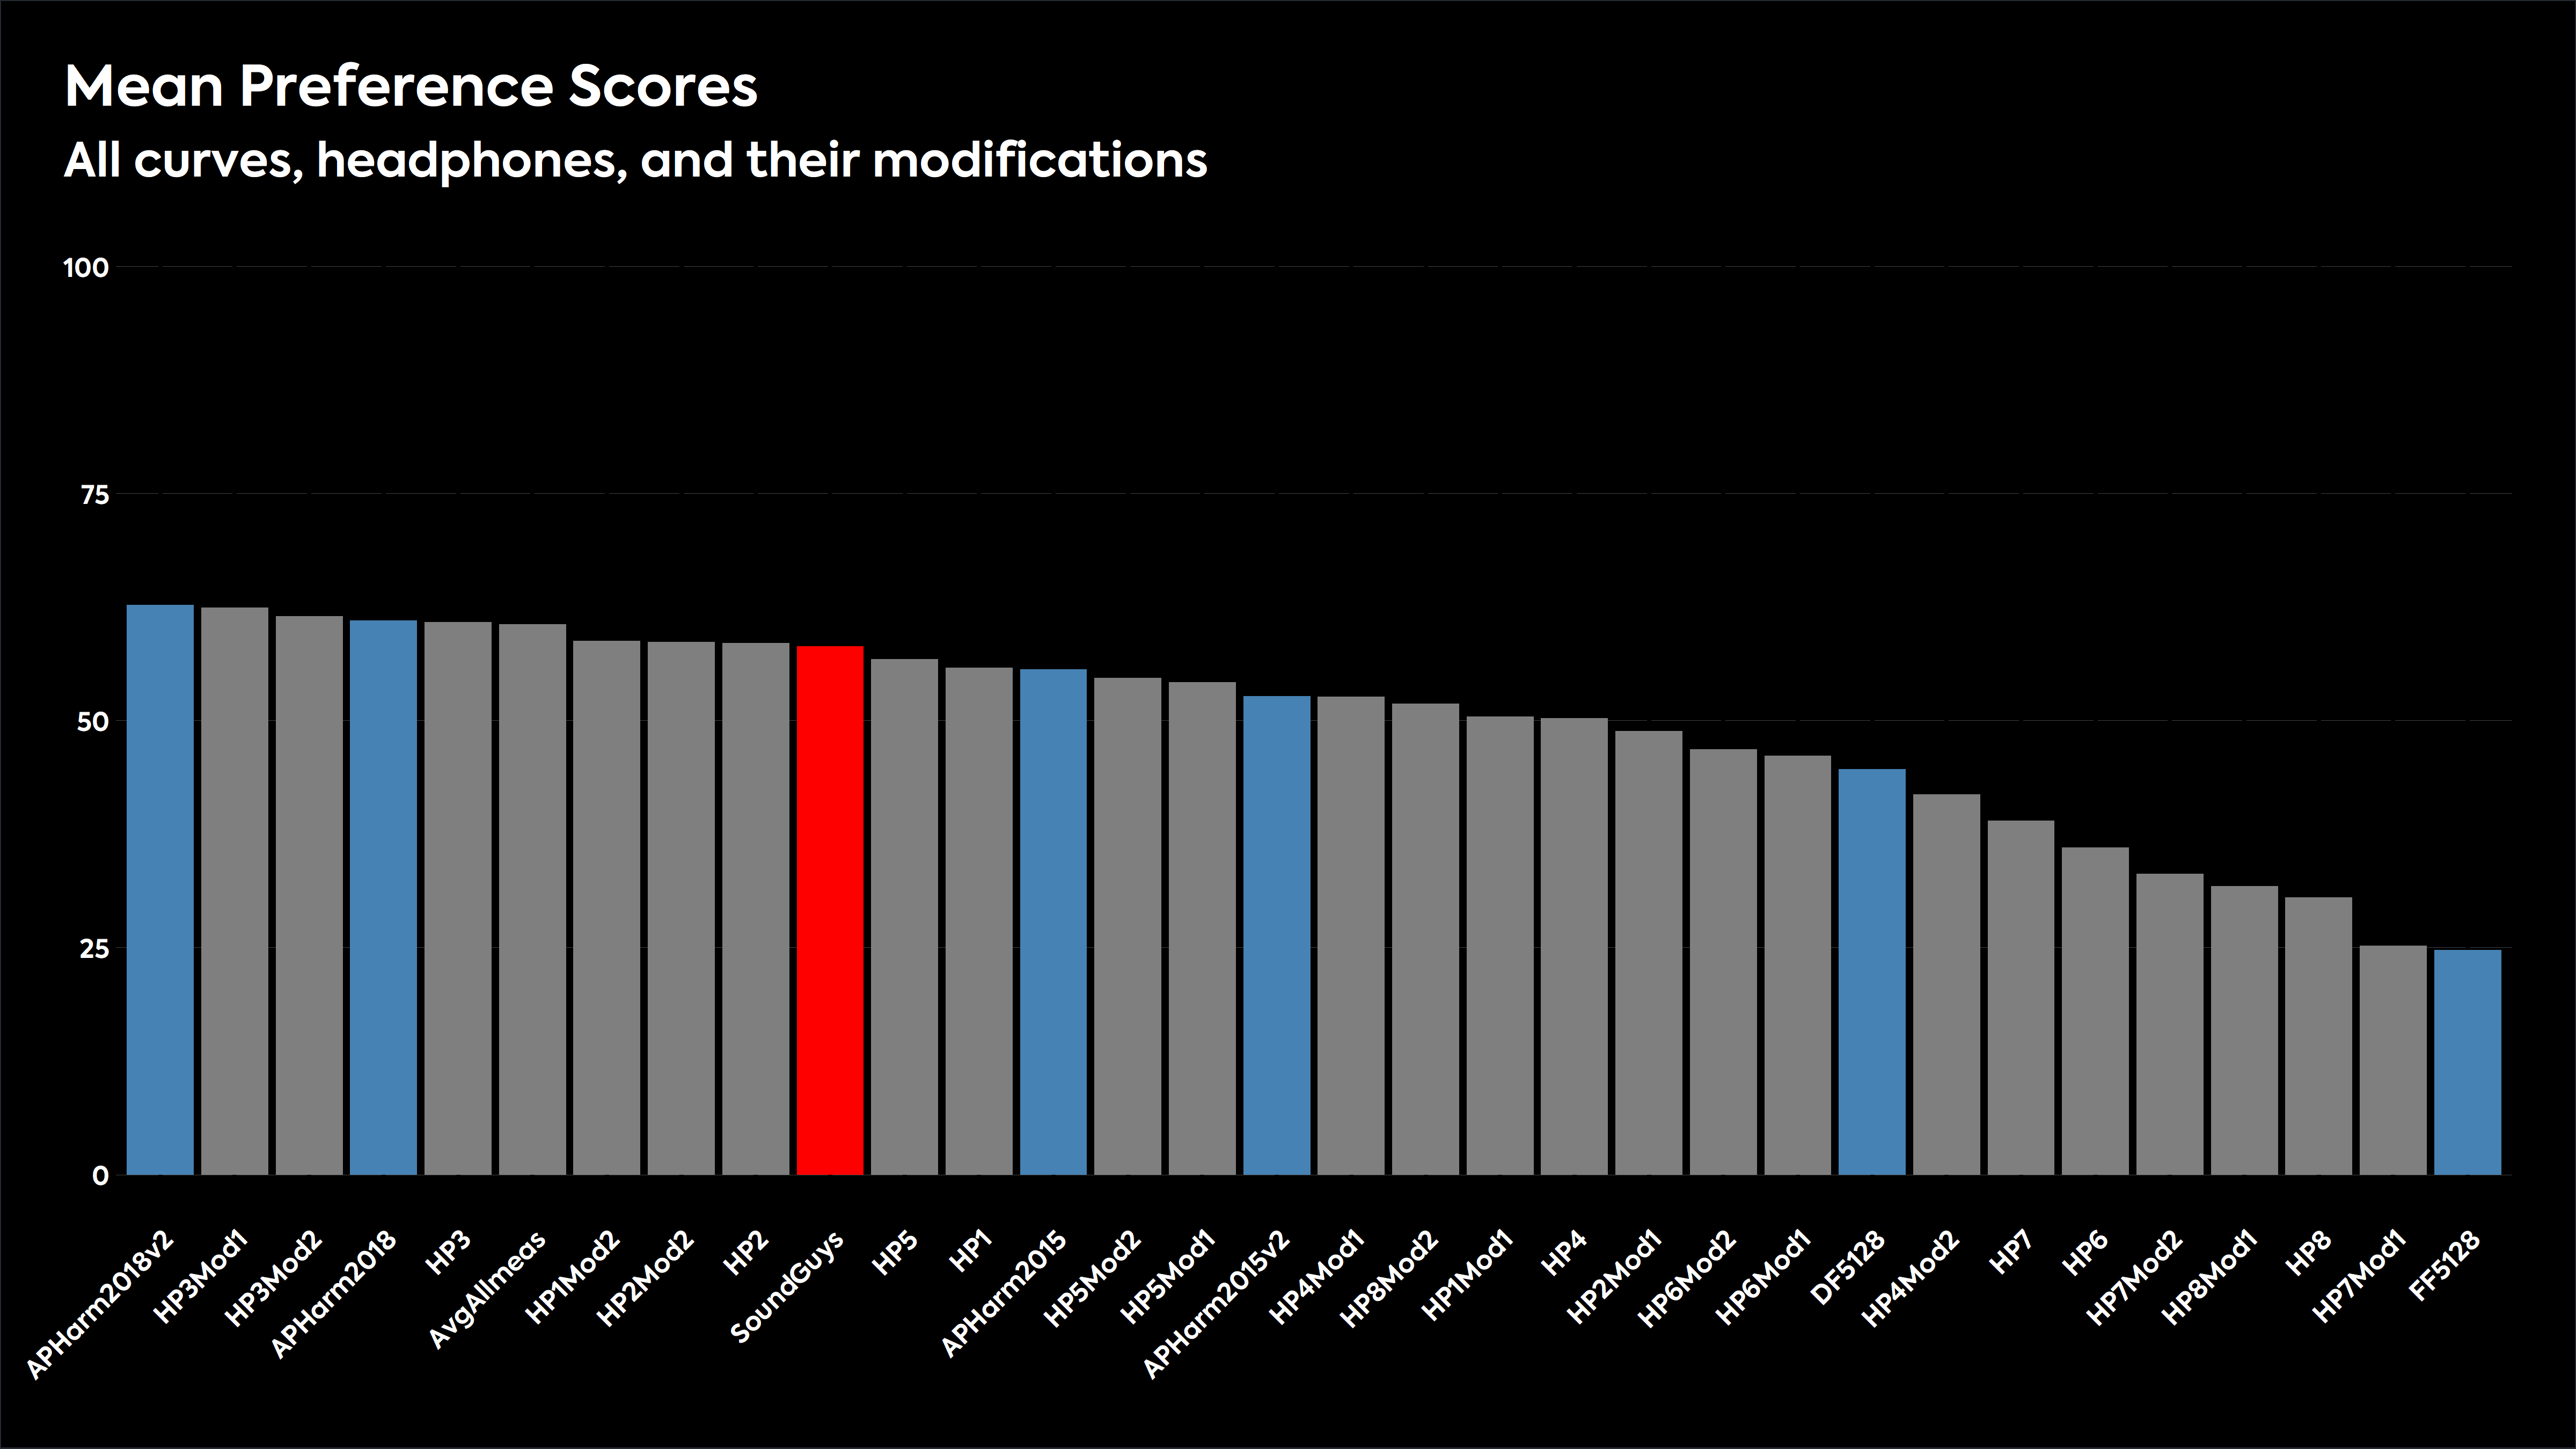 Bar chart showing how headphone frequency responses, modifications, and other targets were judged in listening tests. the SoundGuys headphone preference ranked at 10/32.